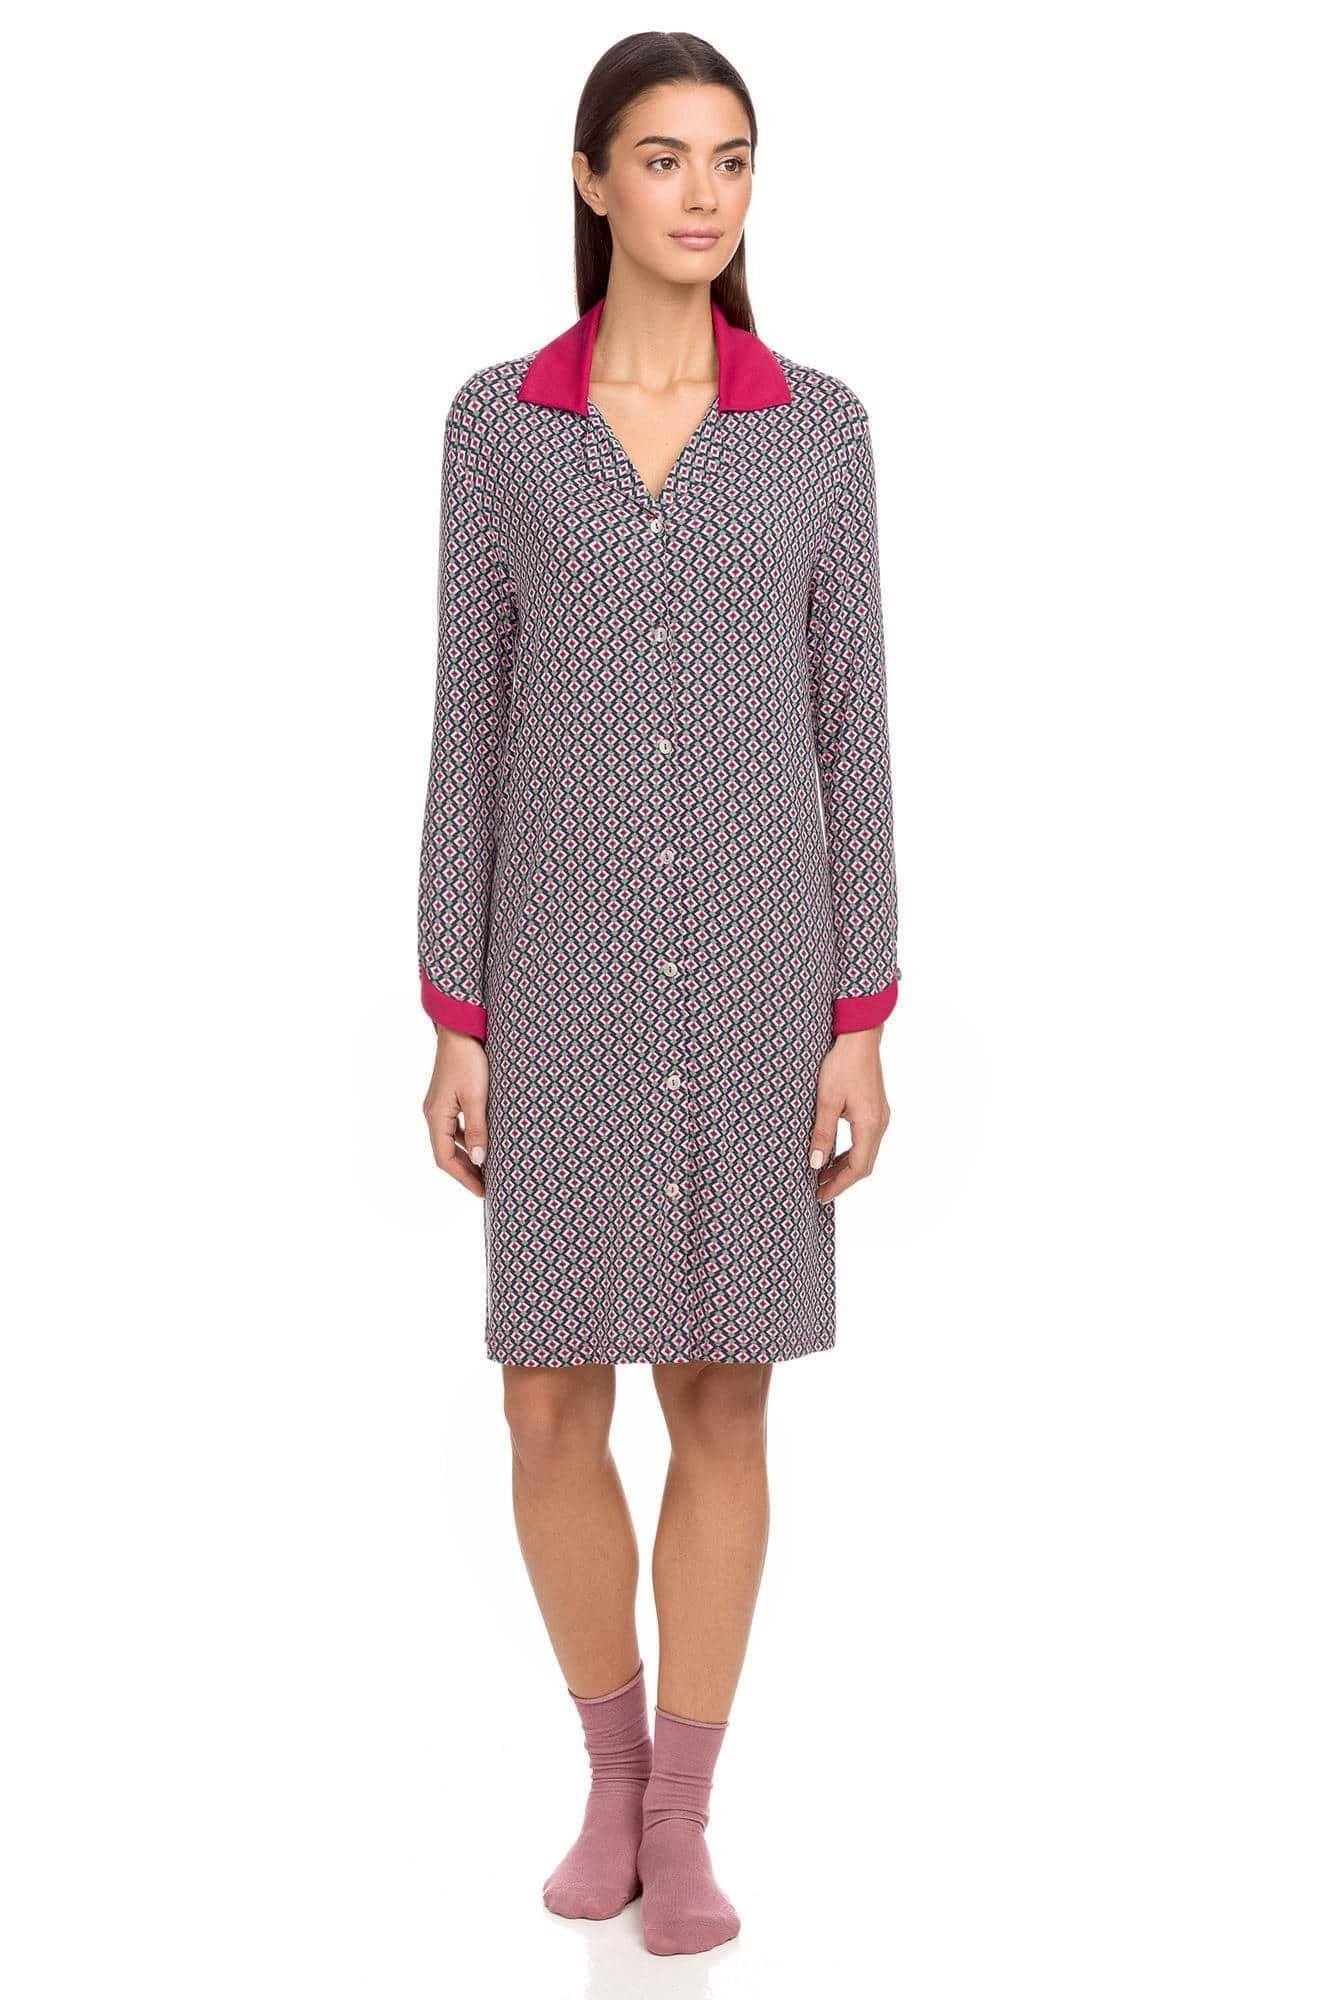 Women’s buttoned Nightgown